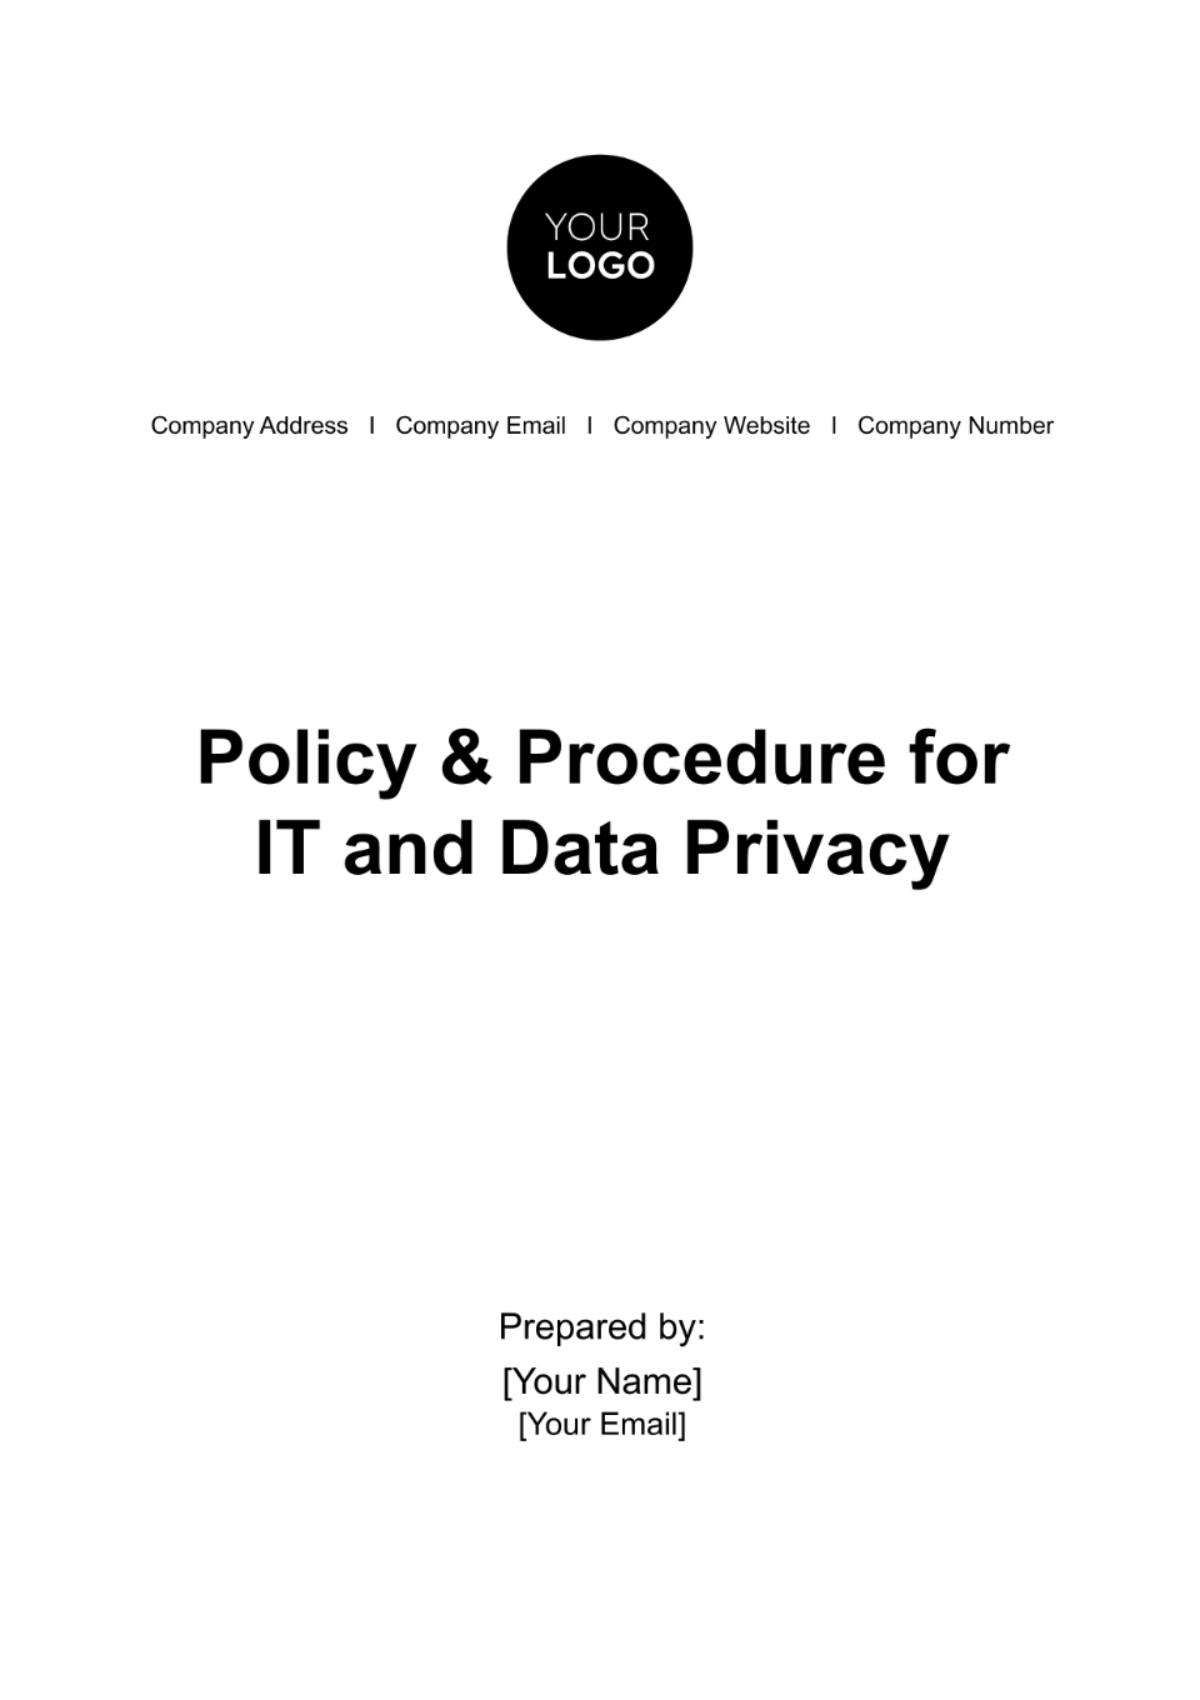 Policy & Procedure for IT and Data Privacy in HR Template